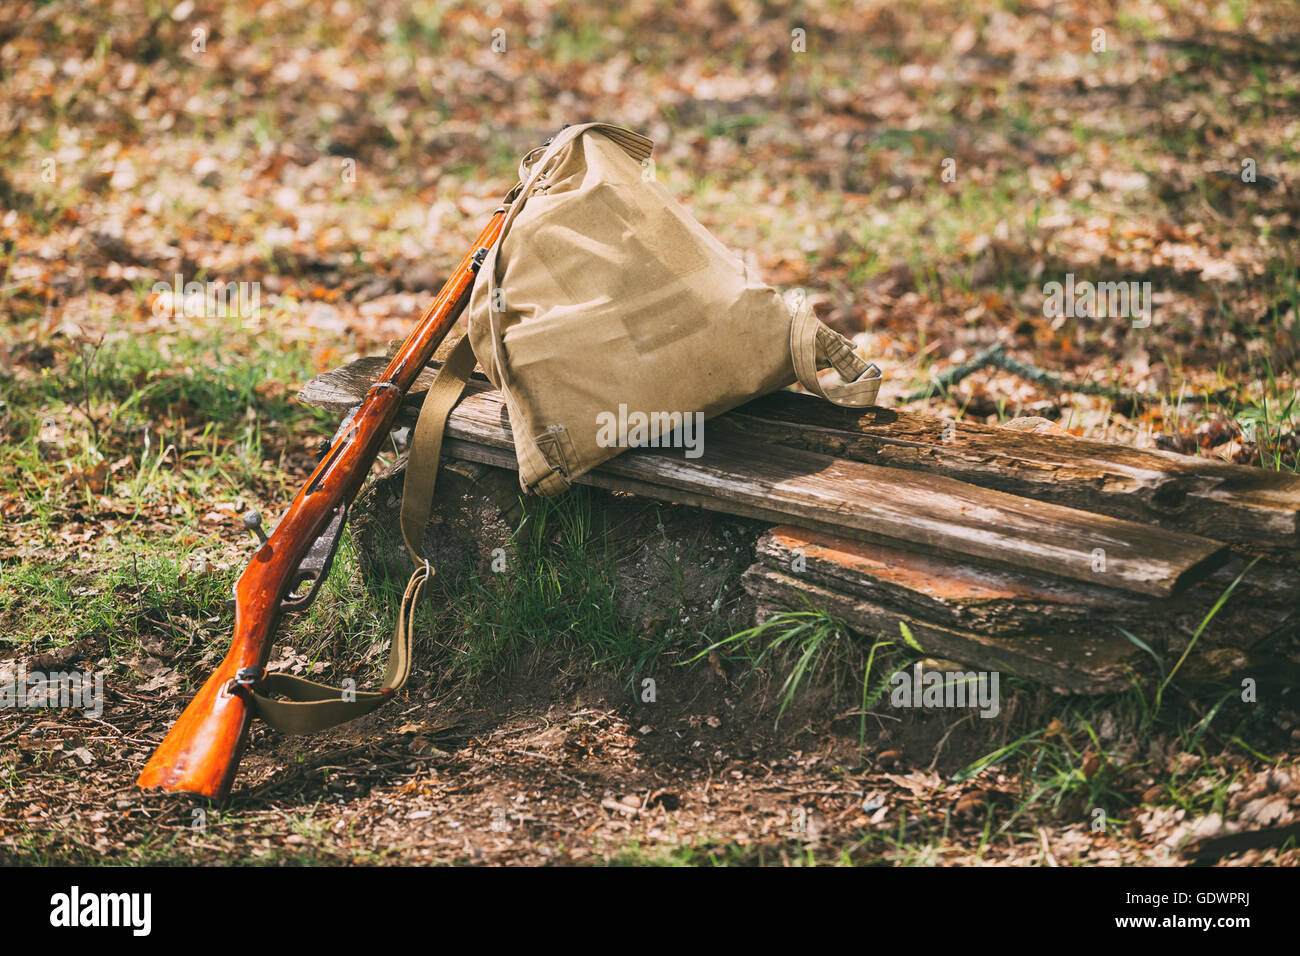 Soviet Russian Rifle Of World War II In Forest Camp Stock Photo